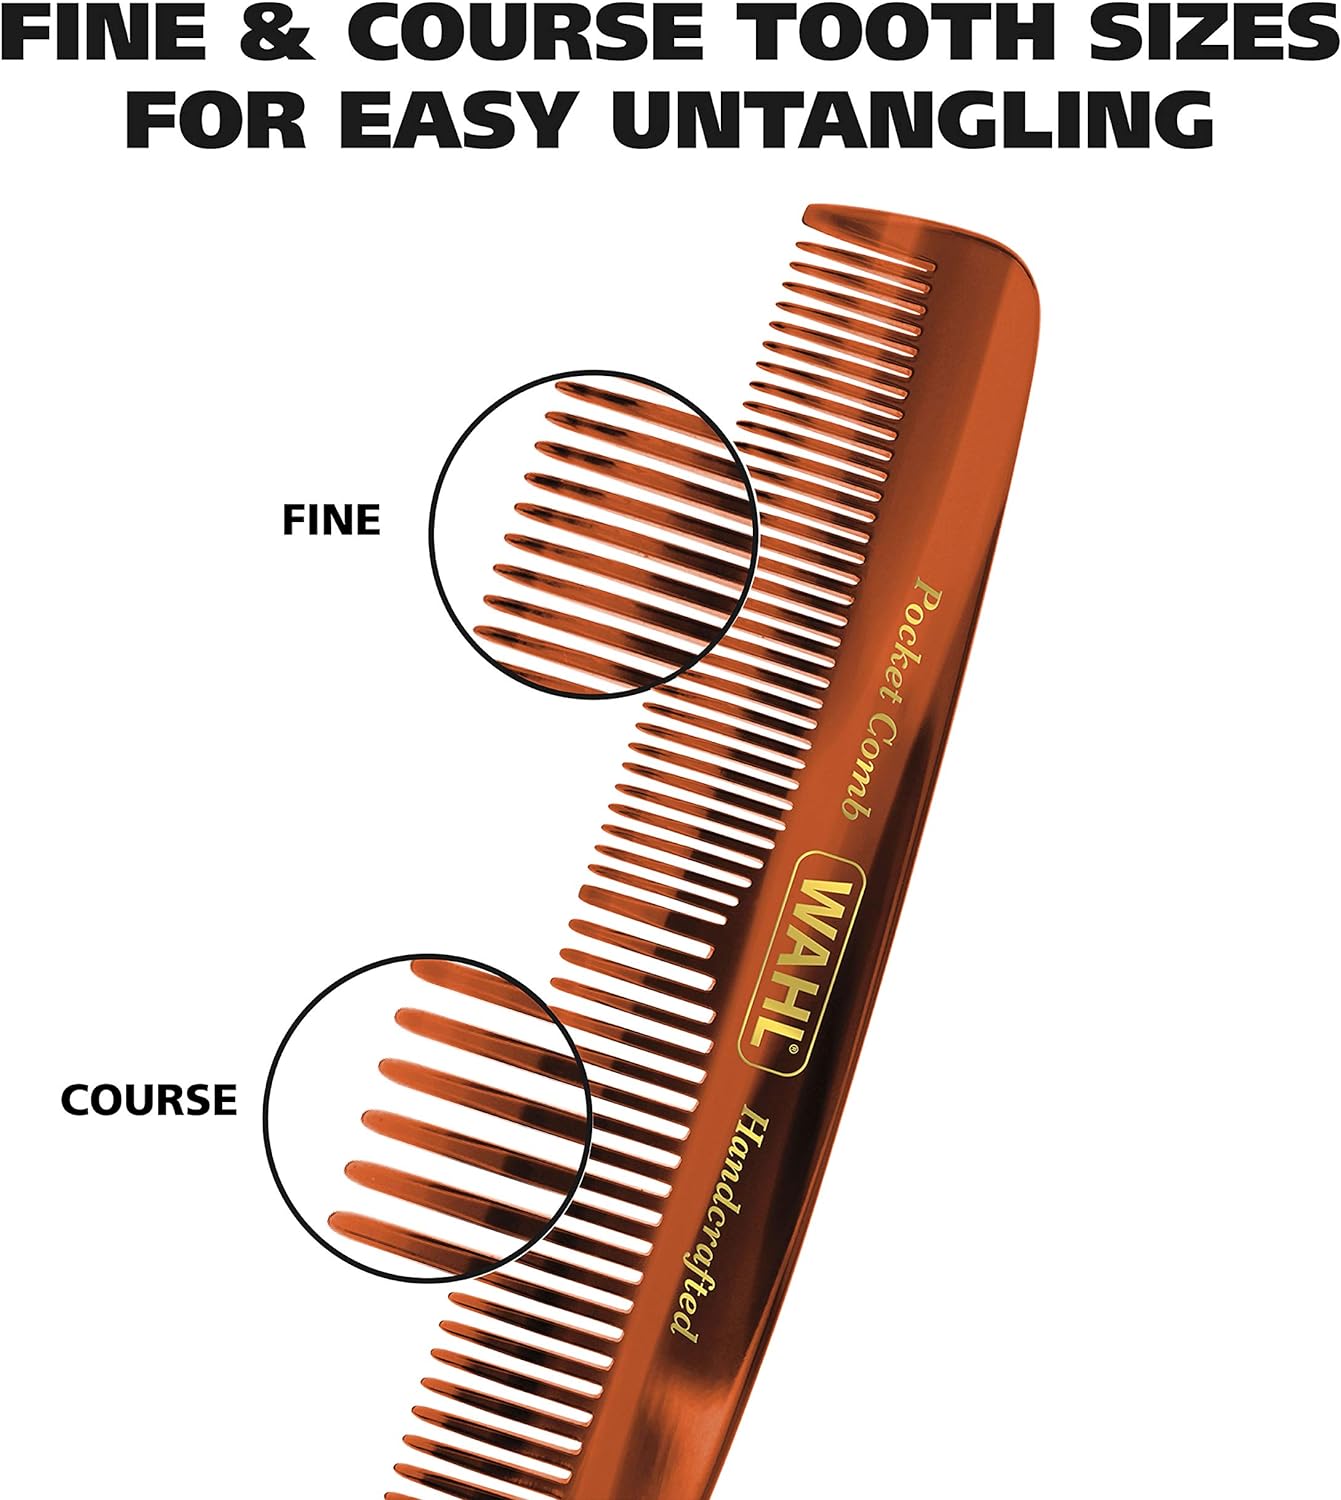 Wahl Model 3324 Beard, Moustache & Hair Pocket Comb for Men's Grooming - Handcrafted & Hand Cut with Cellulose Acetate - Smooth, Rounded Tapered Teeth